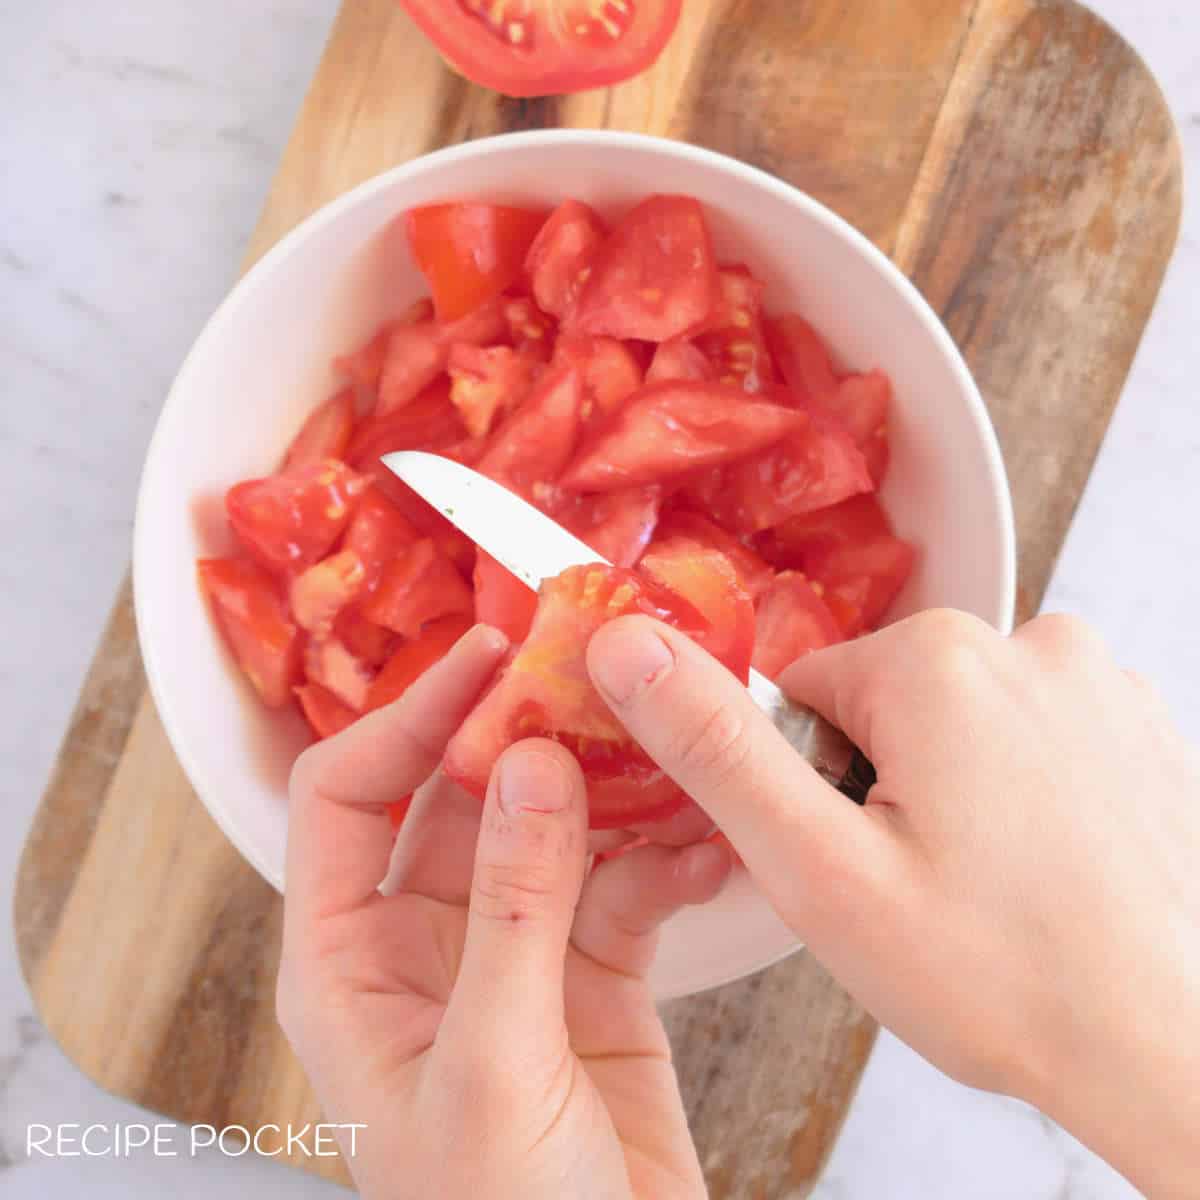 Tomato being cut into small pieces.